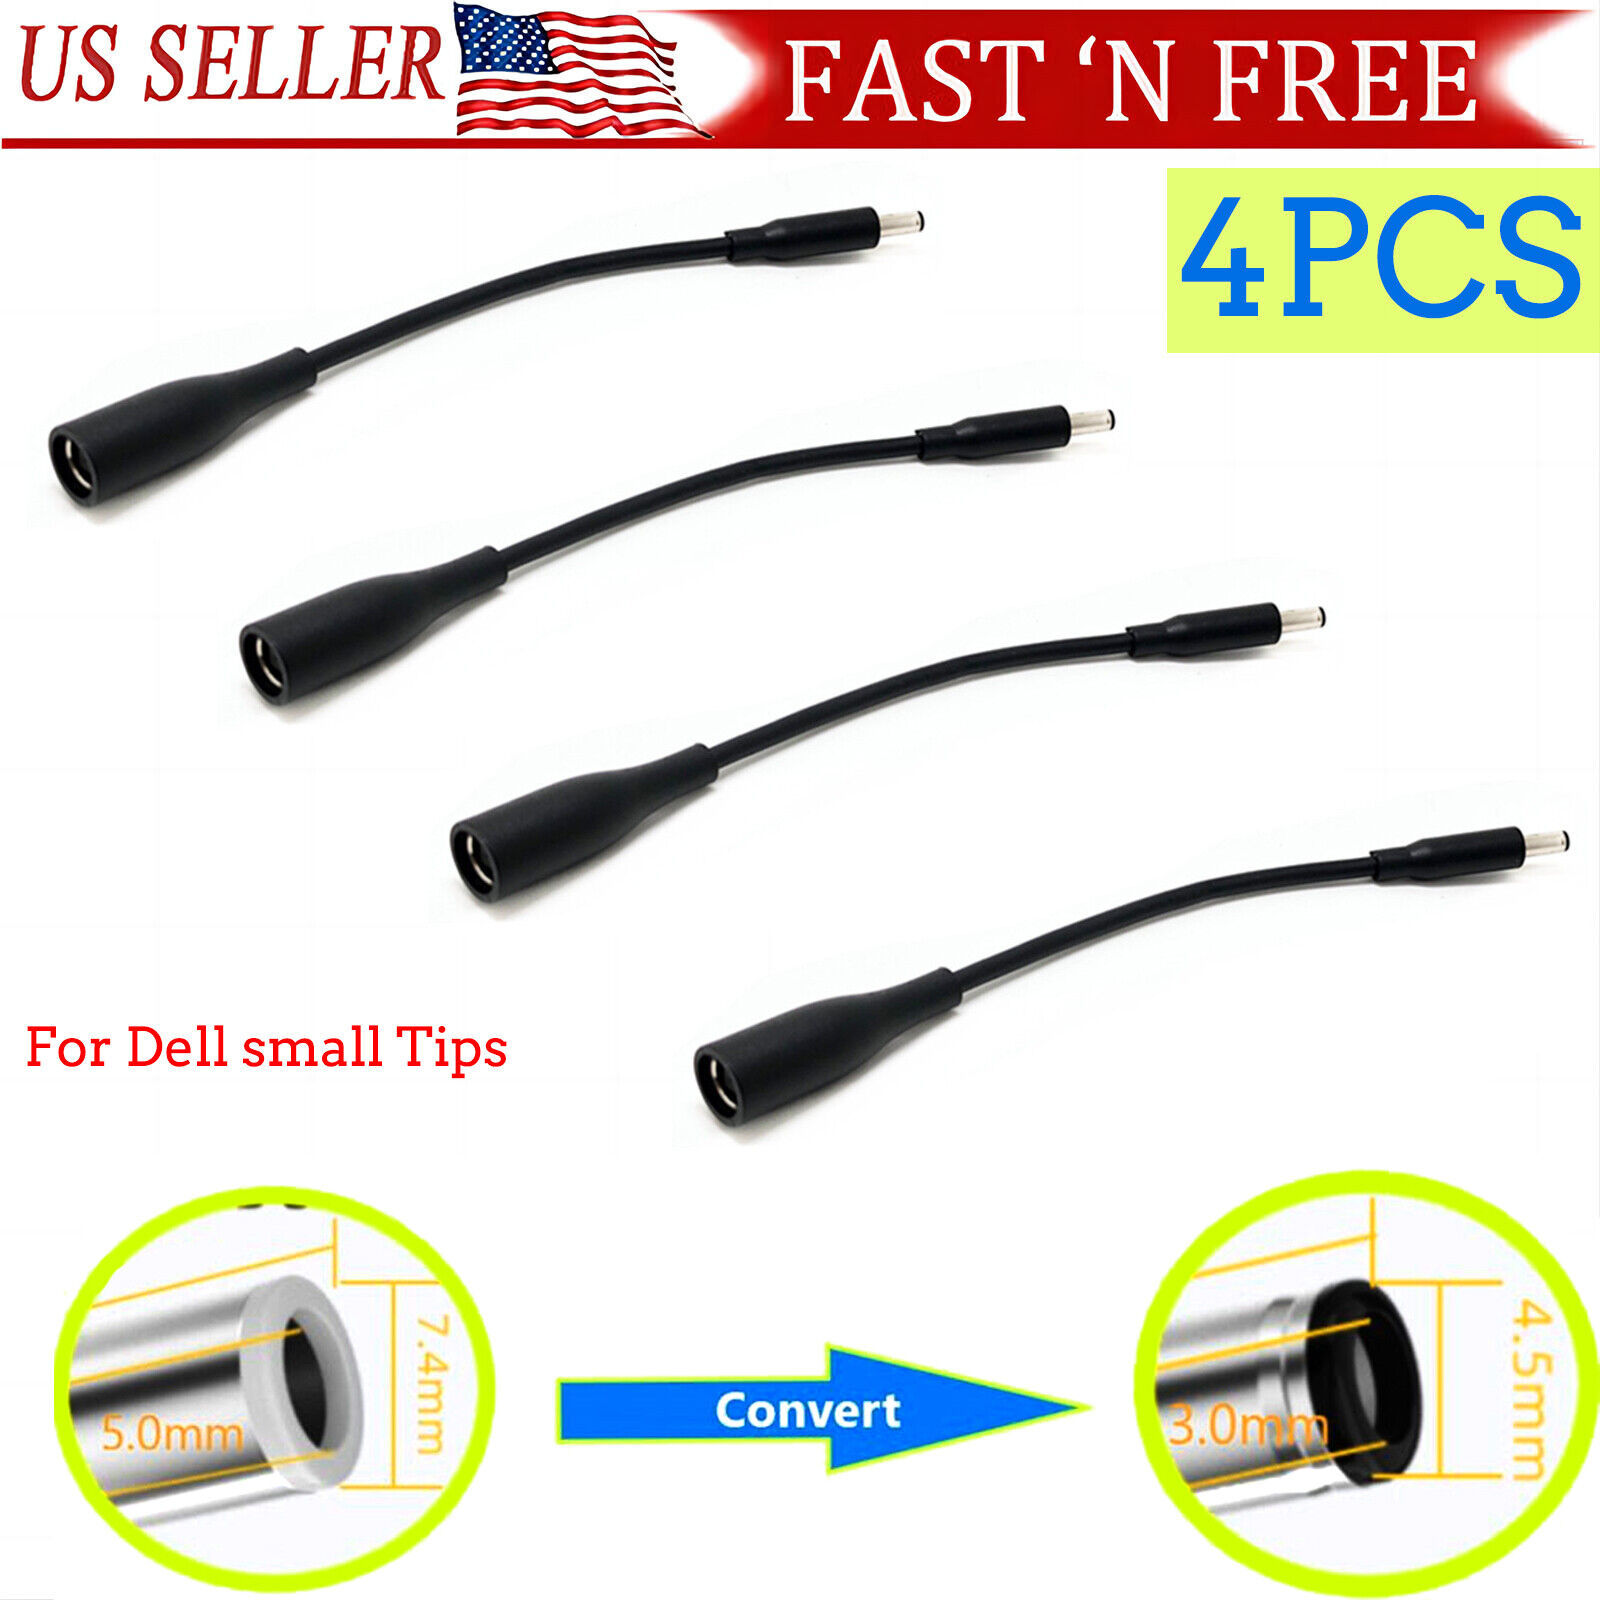 4Pcs DC Power Charger Converter Adapter Cable 7.4mm To 4.5mm For dell small Tips